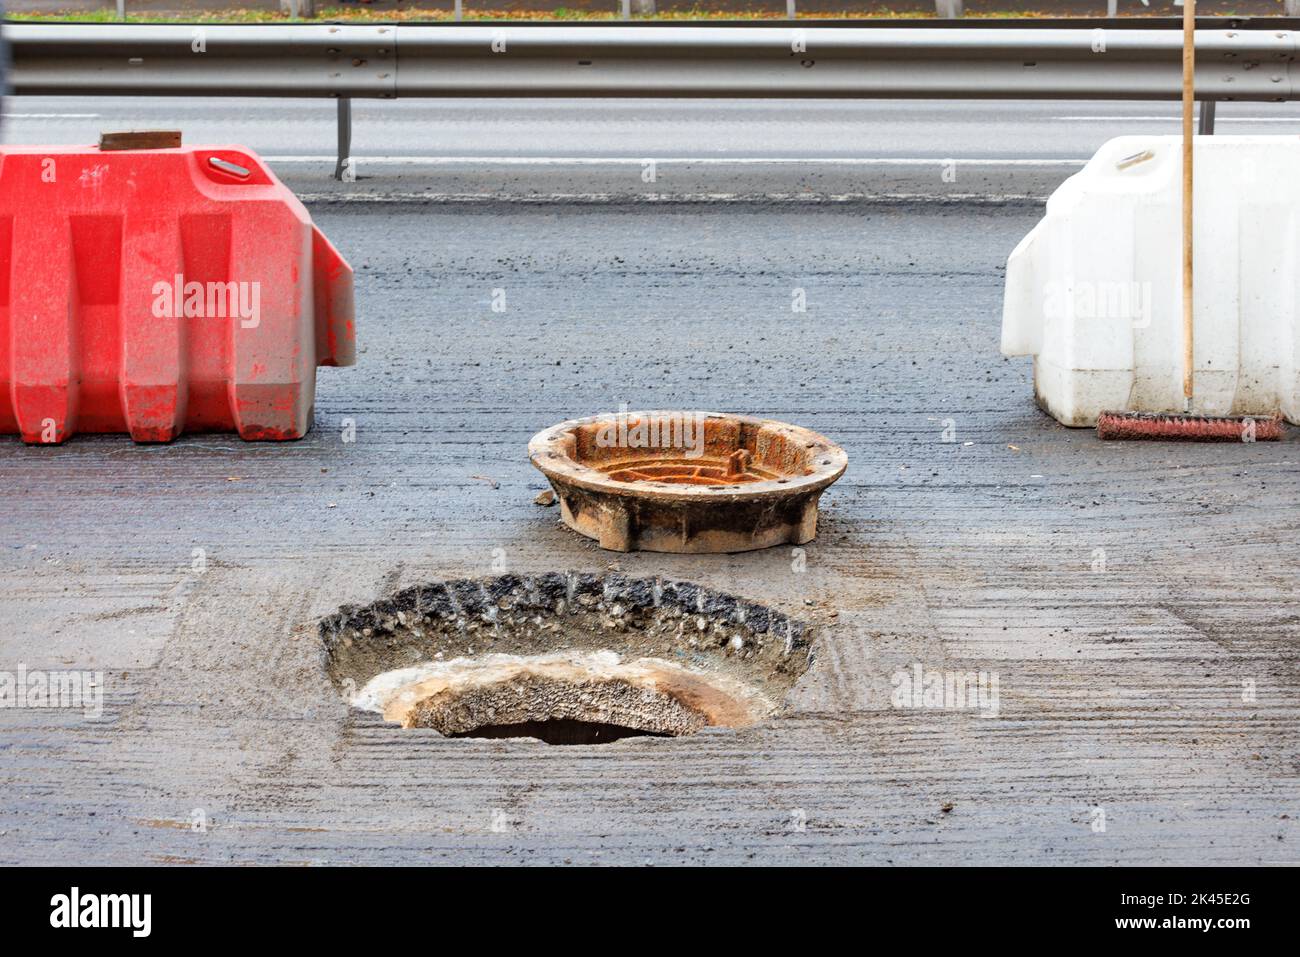 Red and white road billboards warn drivers of road hazards and block a manhole being repaired. Copy space. Stock Photo